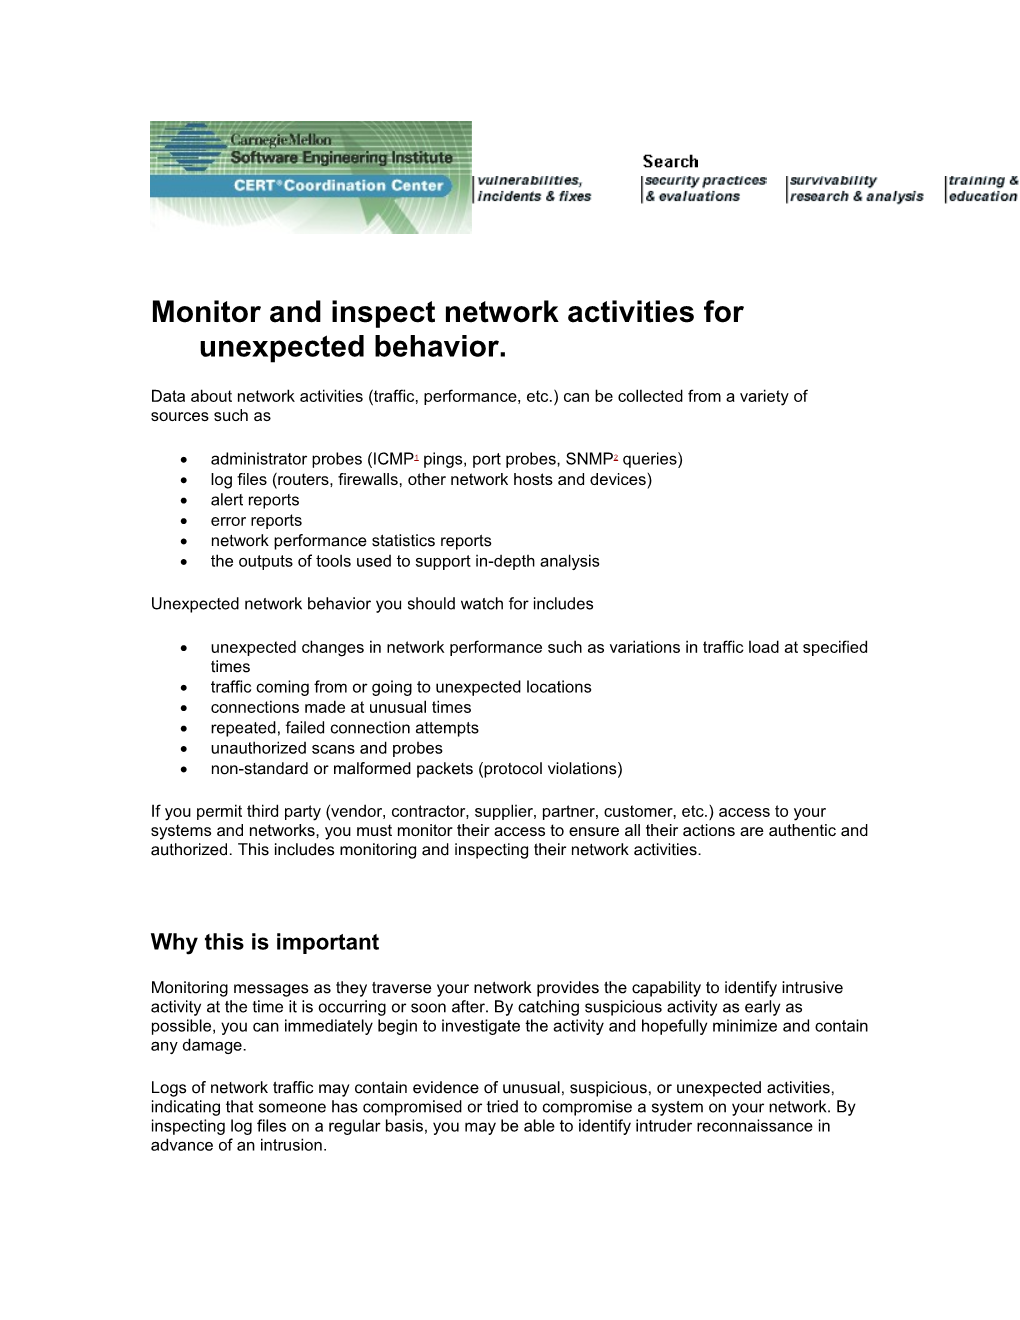 Monitor and Inspect Network Activities for Unexpected Behavior